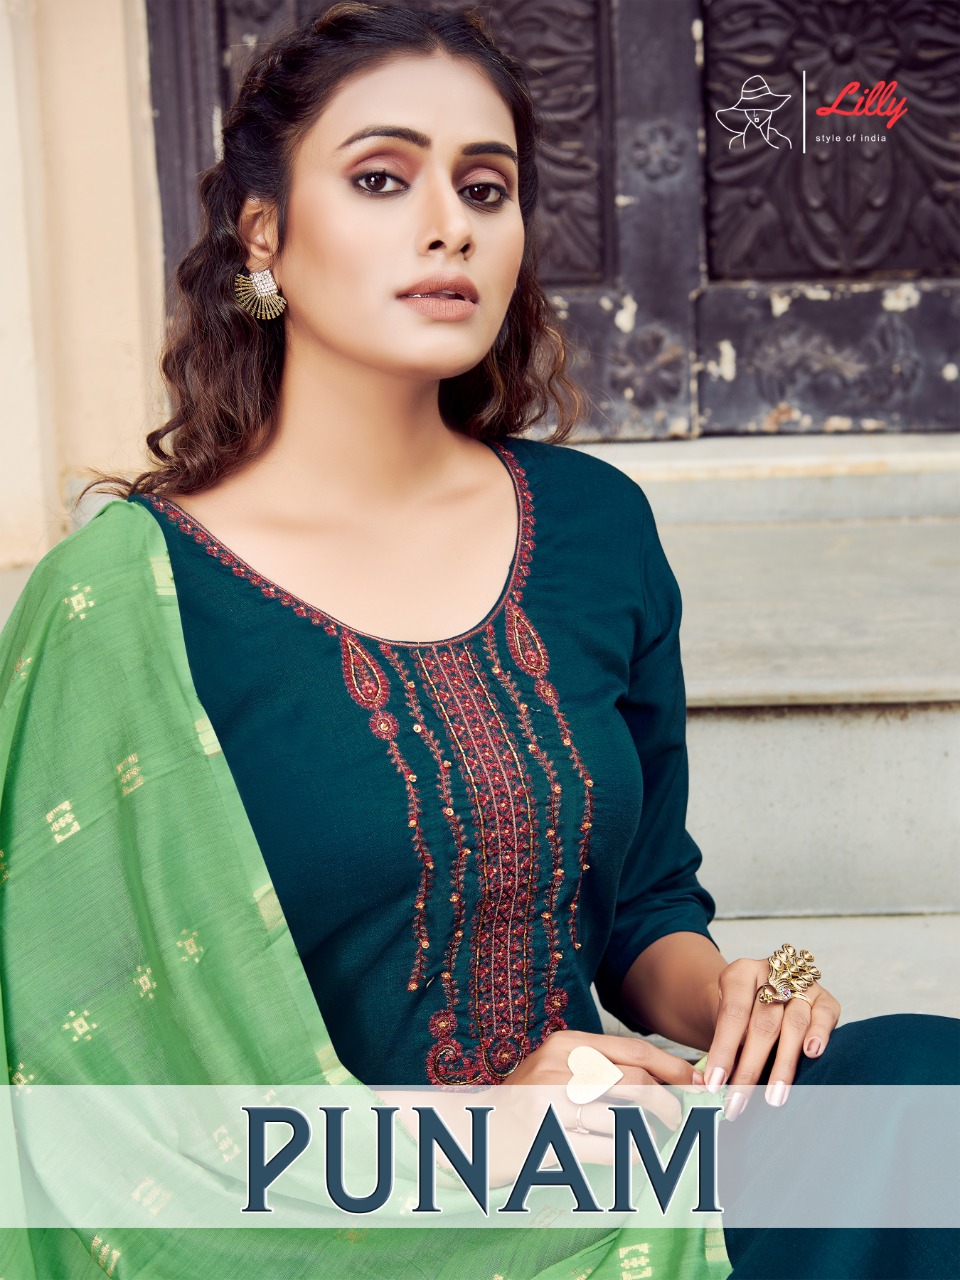 lilly style of india poonam chinon gorgeous look top bottom dupatta catalog